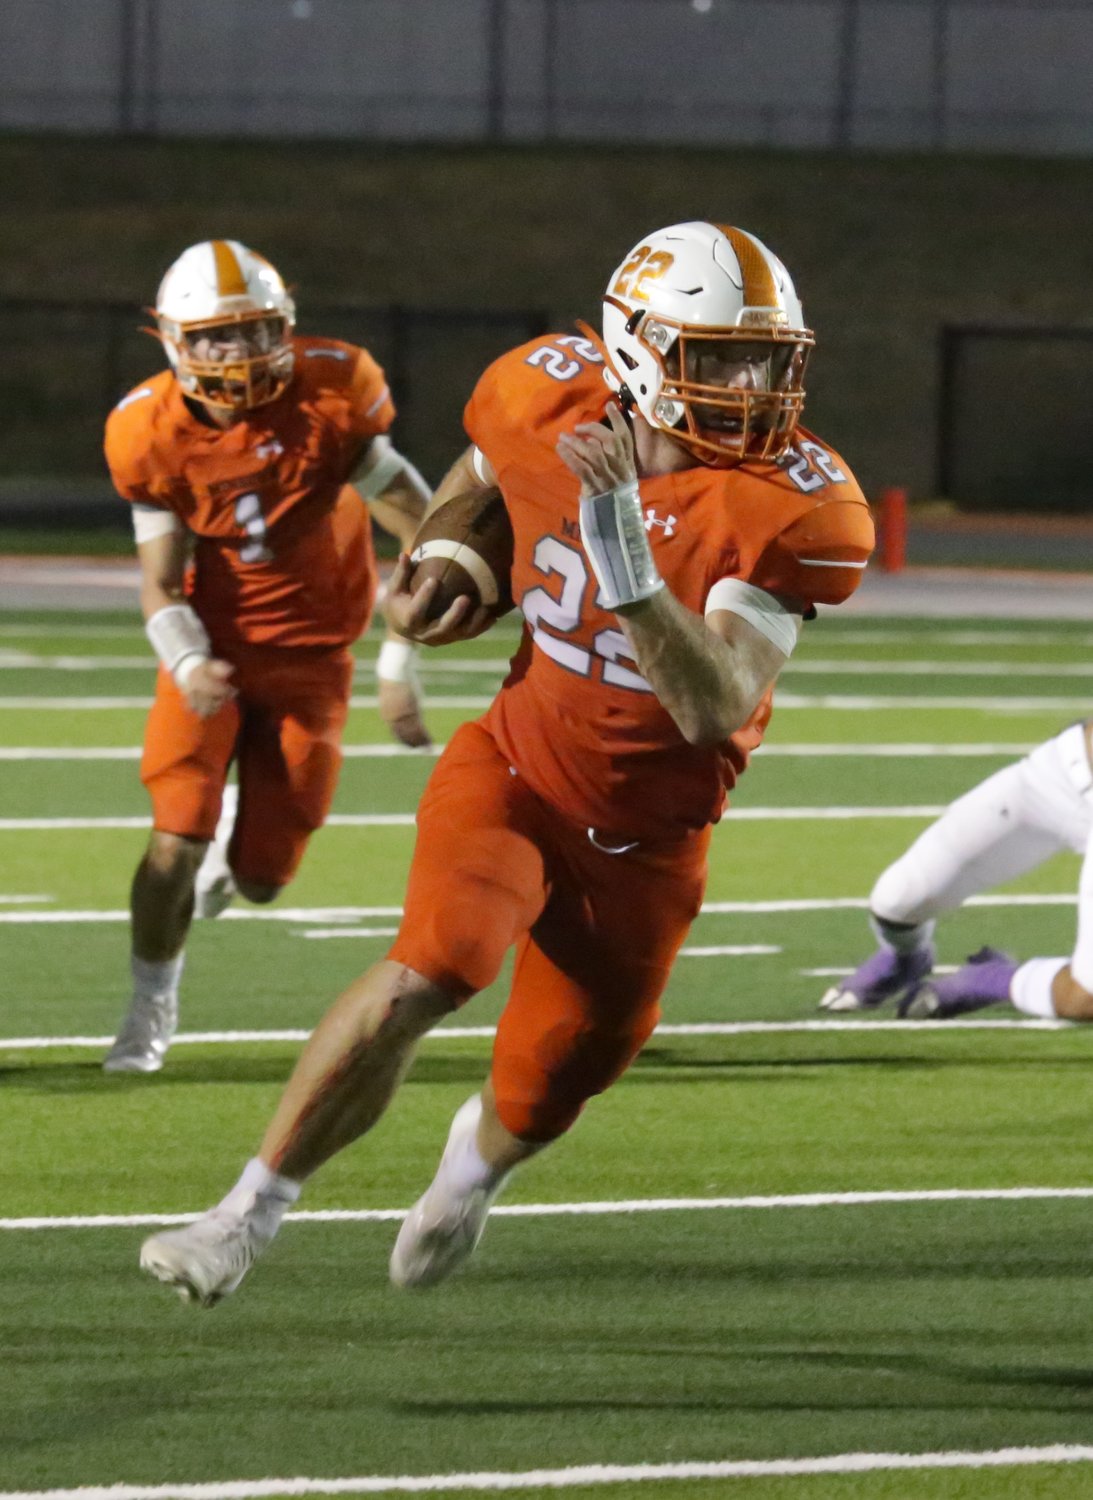 Mineola’s Dawson Pendergrass carried for 169 yards on 36 carries against Mt. Vernon. He ran for two touchdowns and threw for a third.